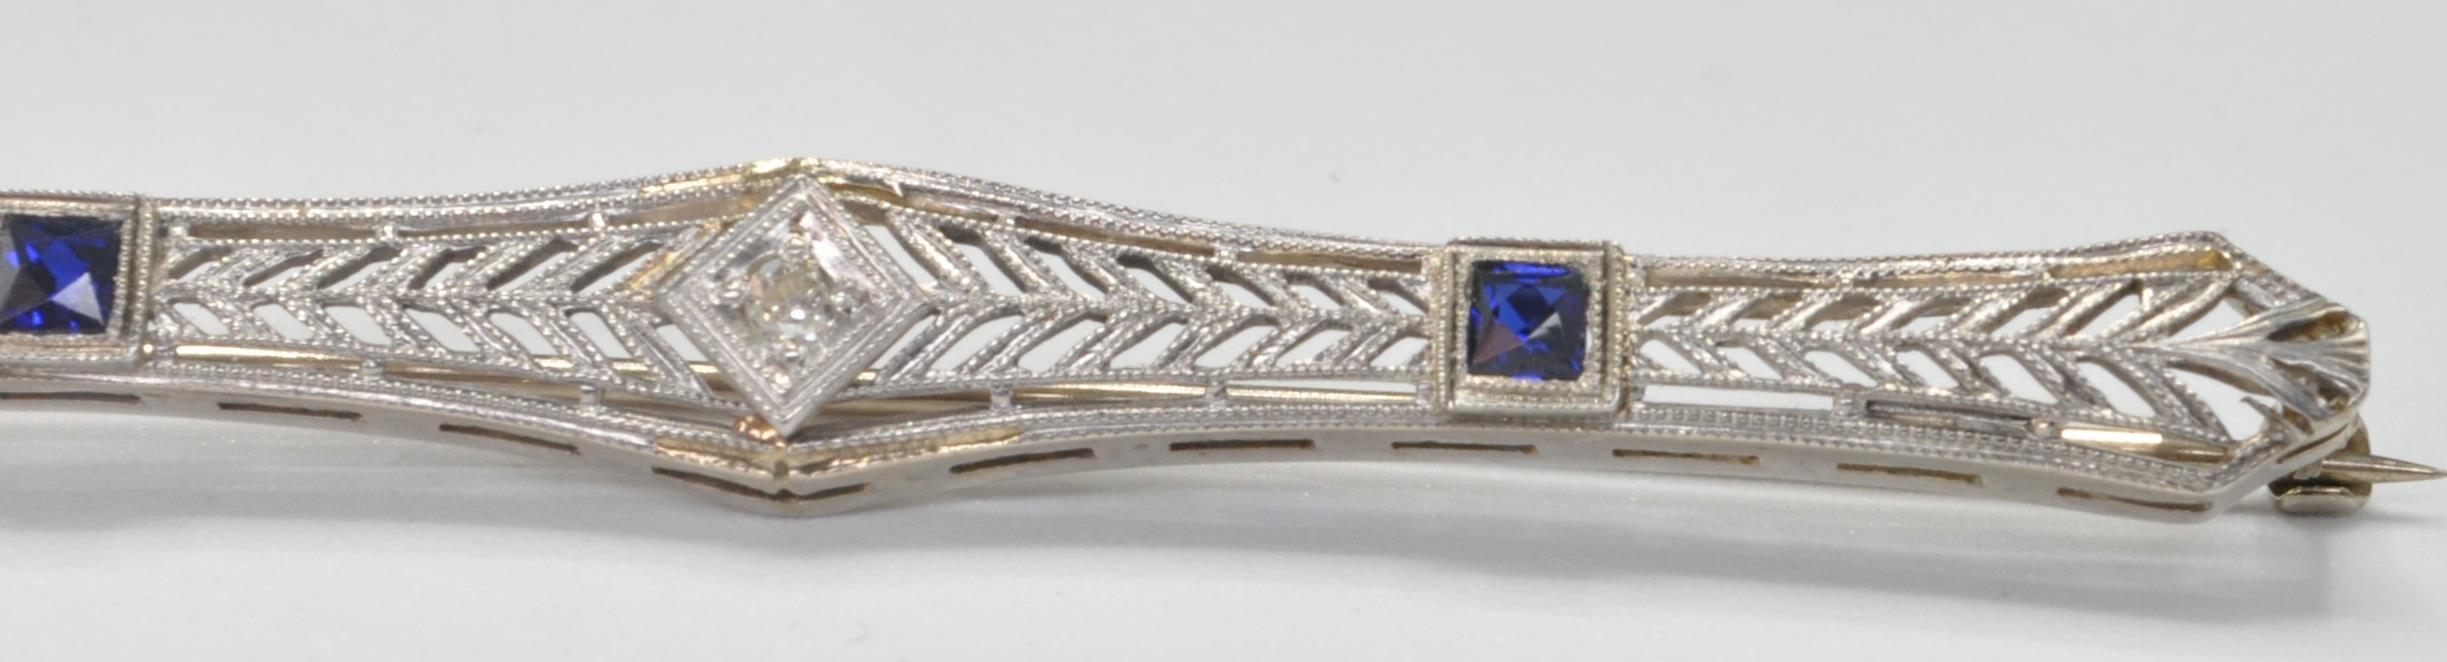 ANTIQUE WHITE GOLD DIAMOND AND SAPPHIRE BAR BROOCH - Image 3 of 6